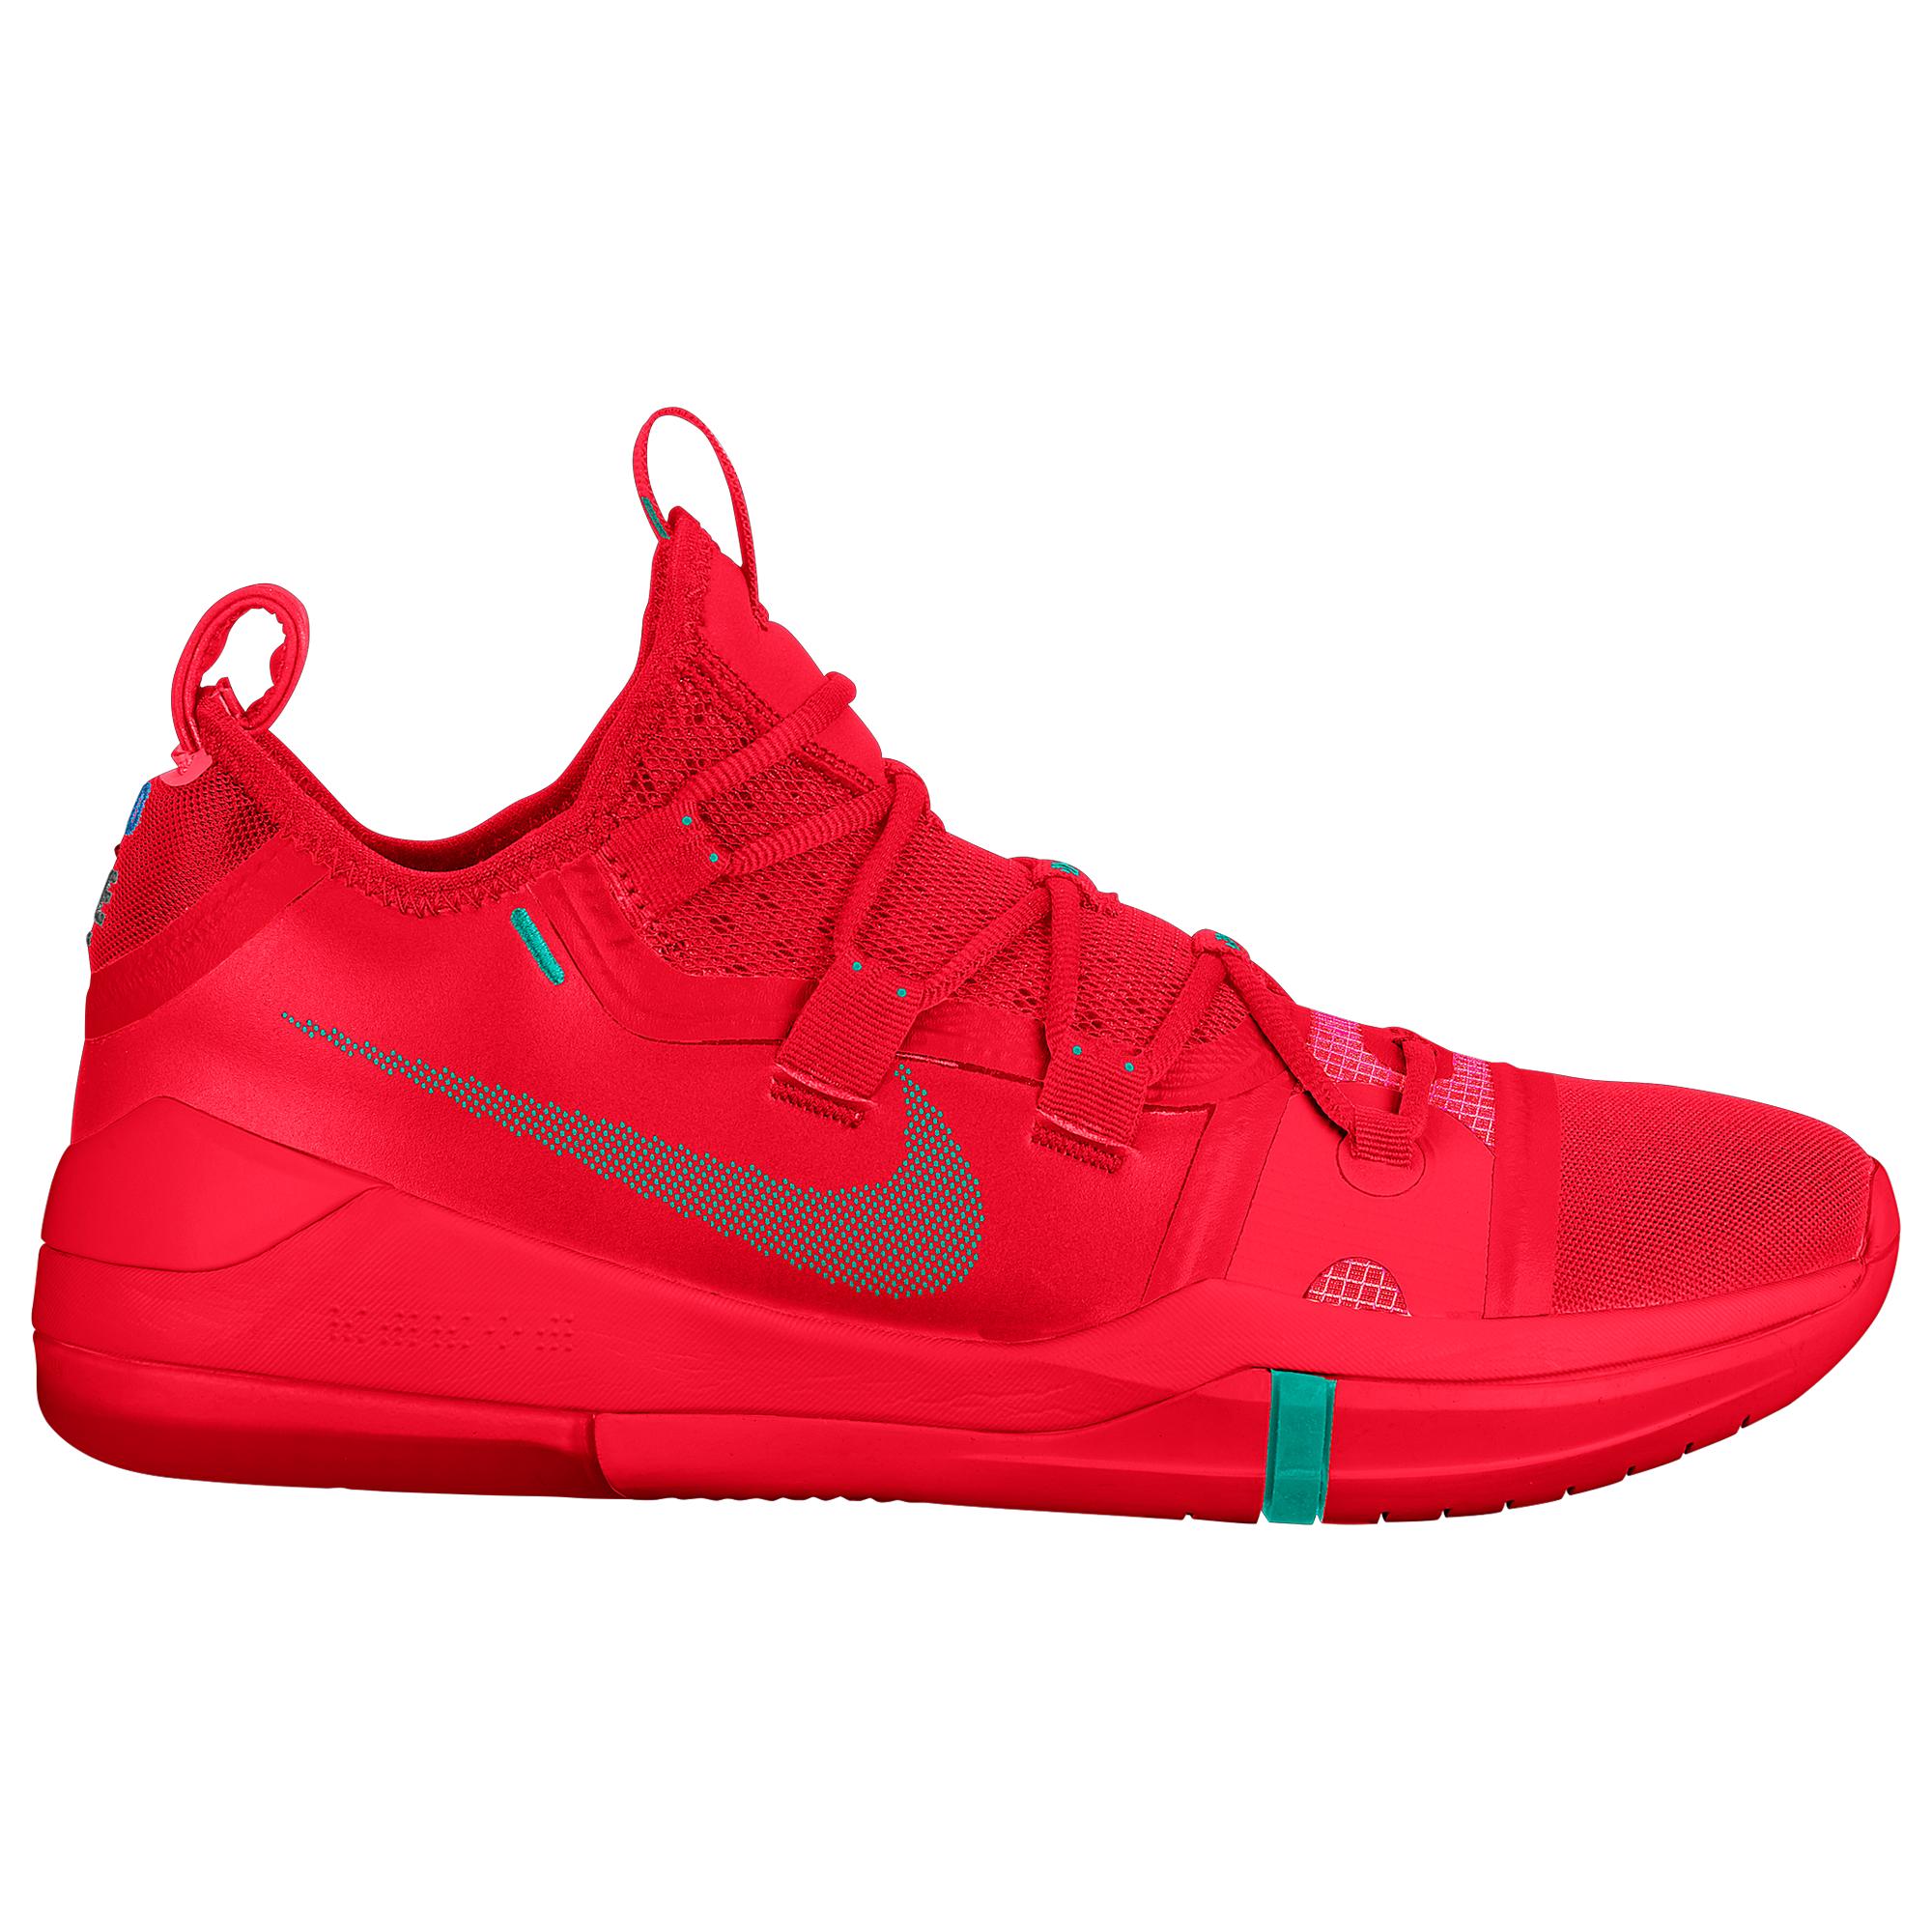 nike red basketball shoes Off 57% - jpoyer.com